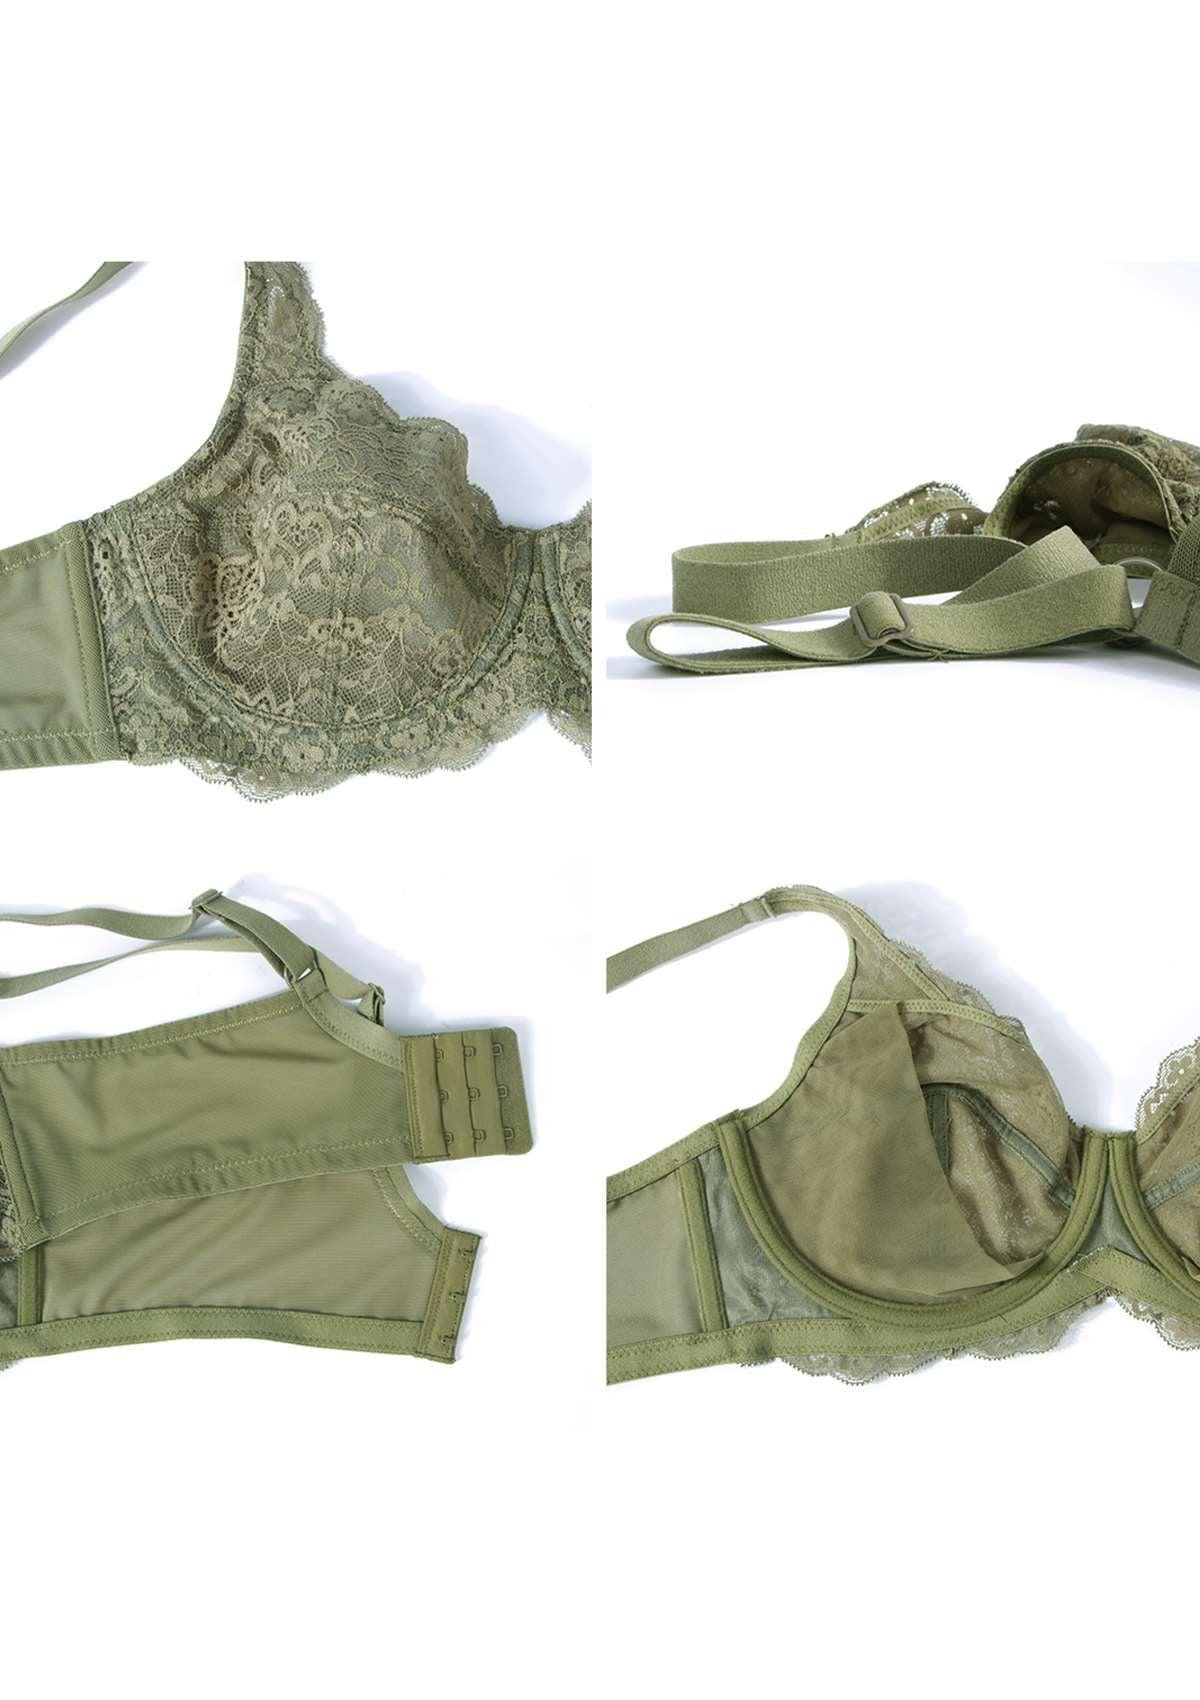 HSIA All-Over Floral Lace Unlined Bra: Minimizer Bra For Heavy Breasts - Dark Green / 42 / C